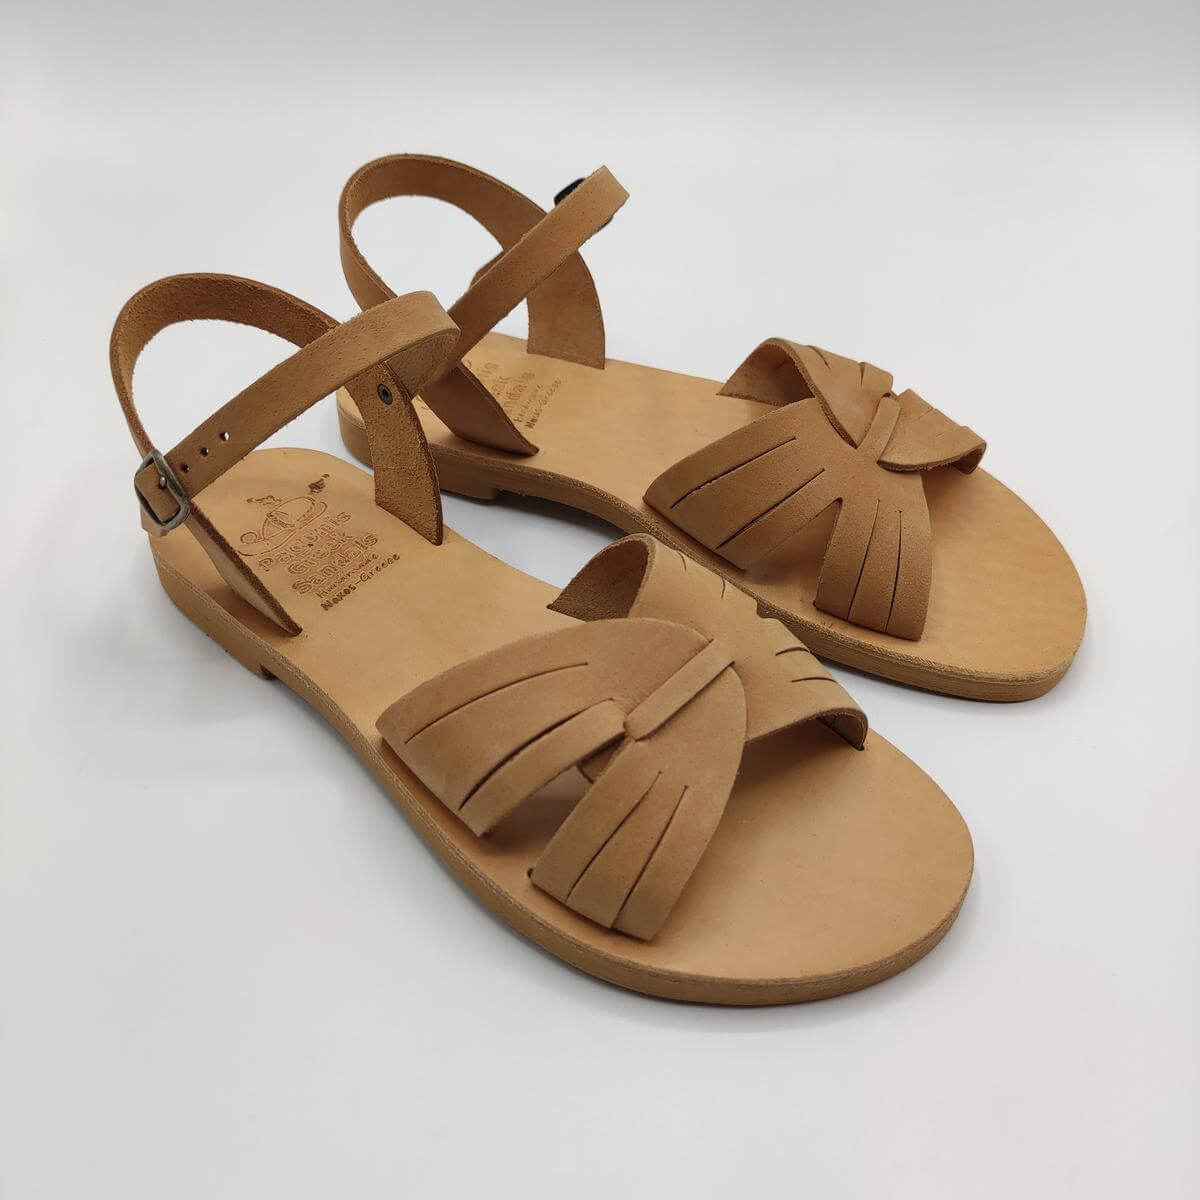 Leather Sandal Two Interlocking Straps Across The Front Nude Color